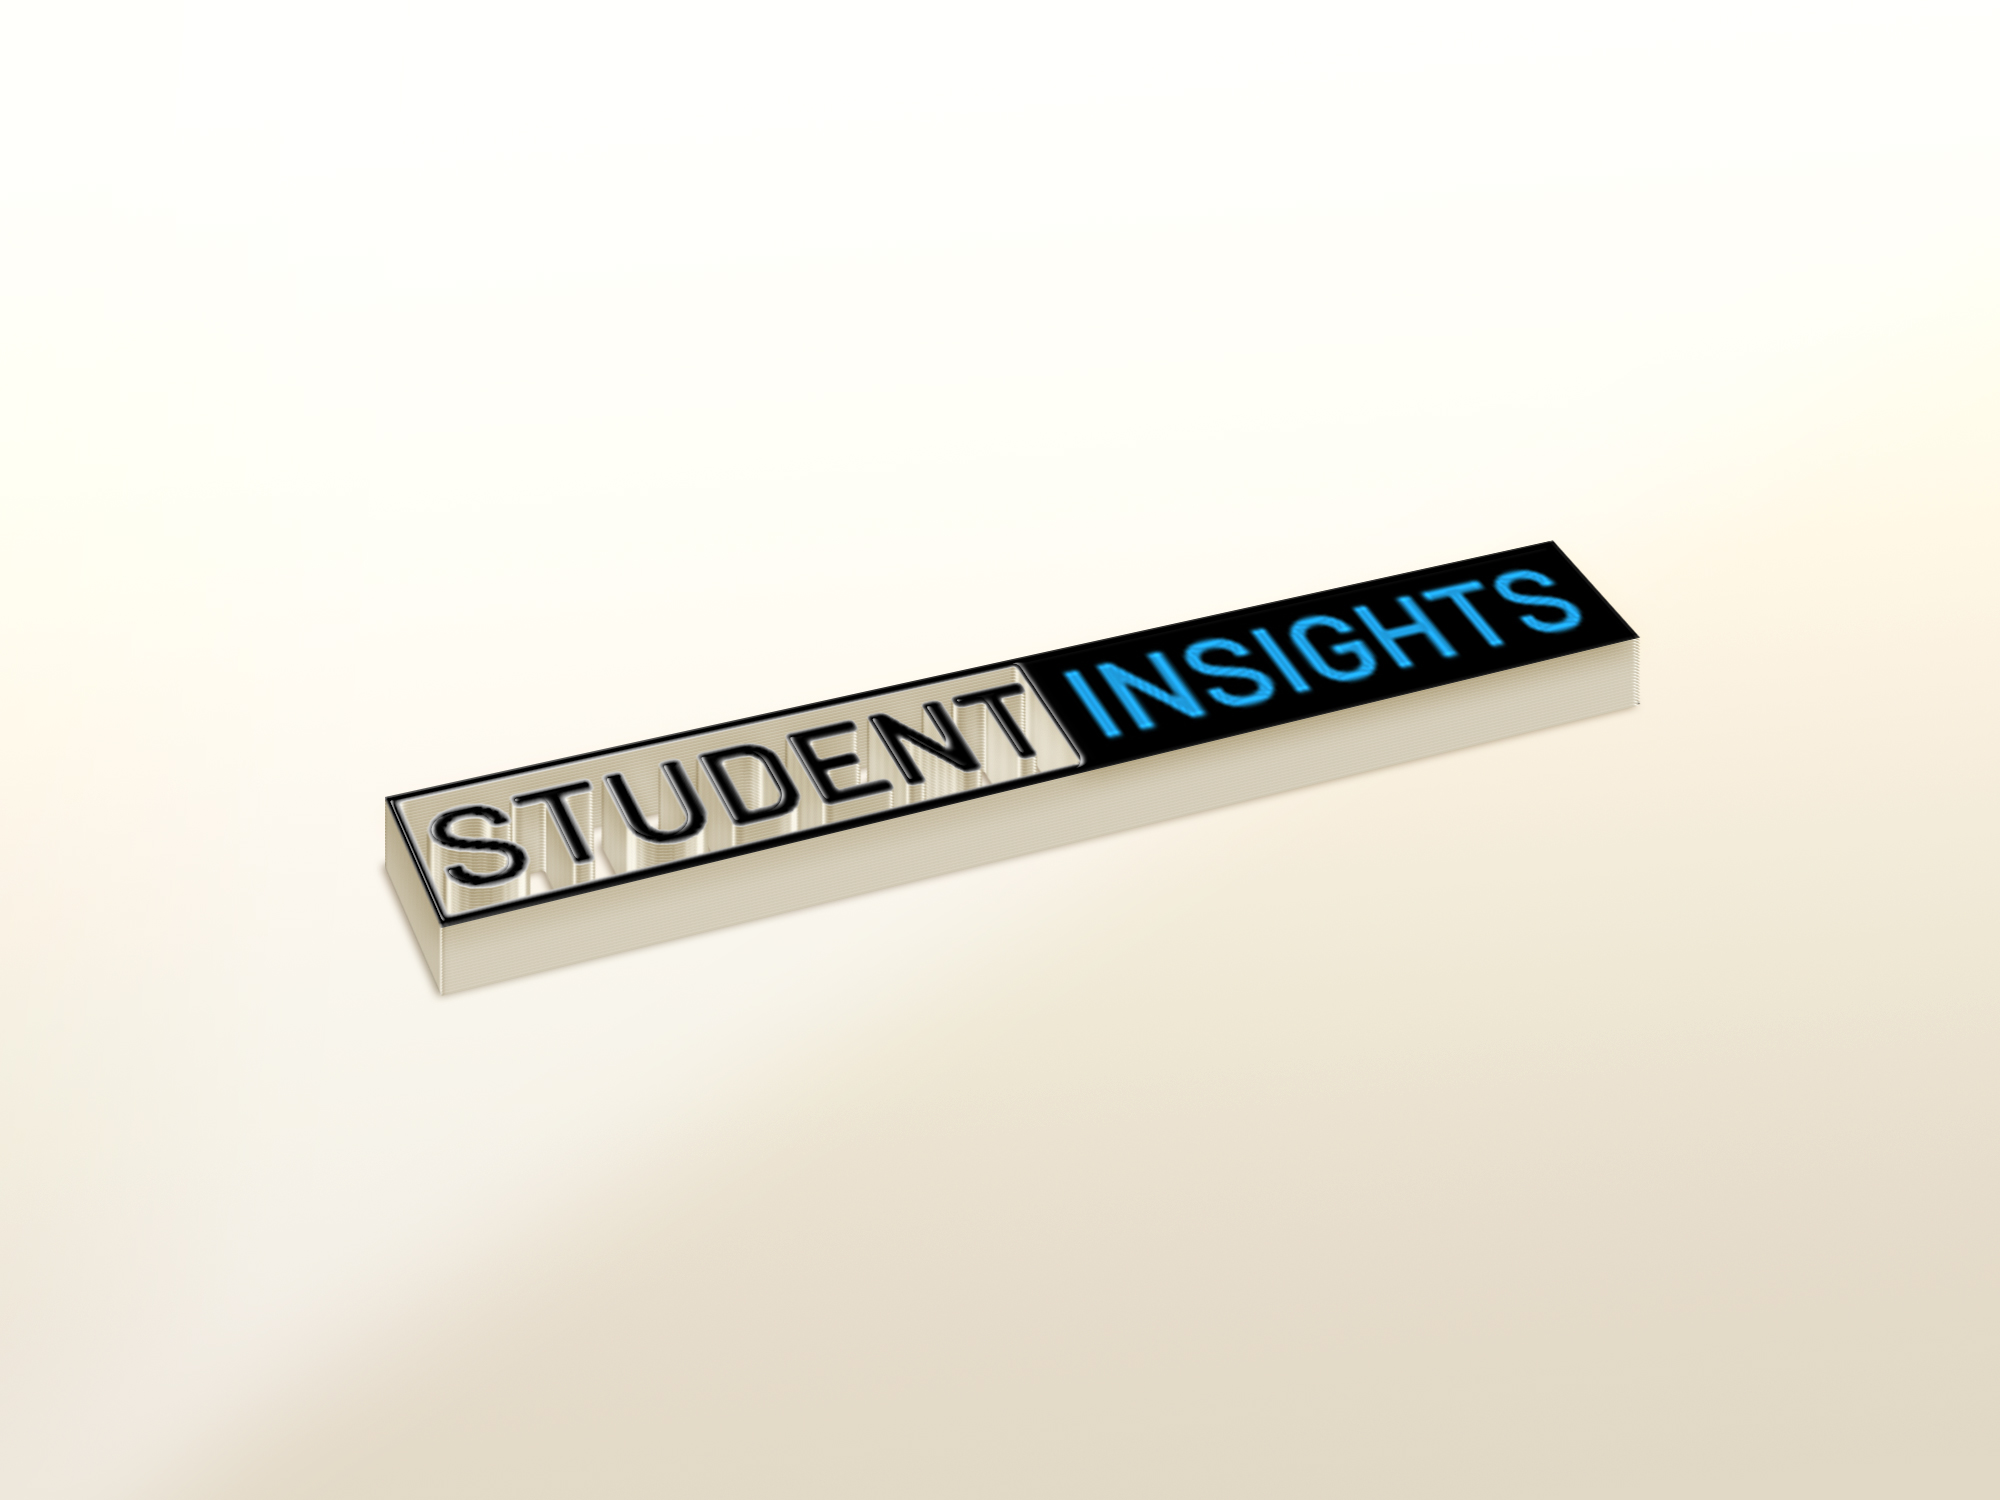 student insights - xpertlab technologies private limited